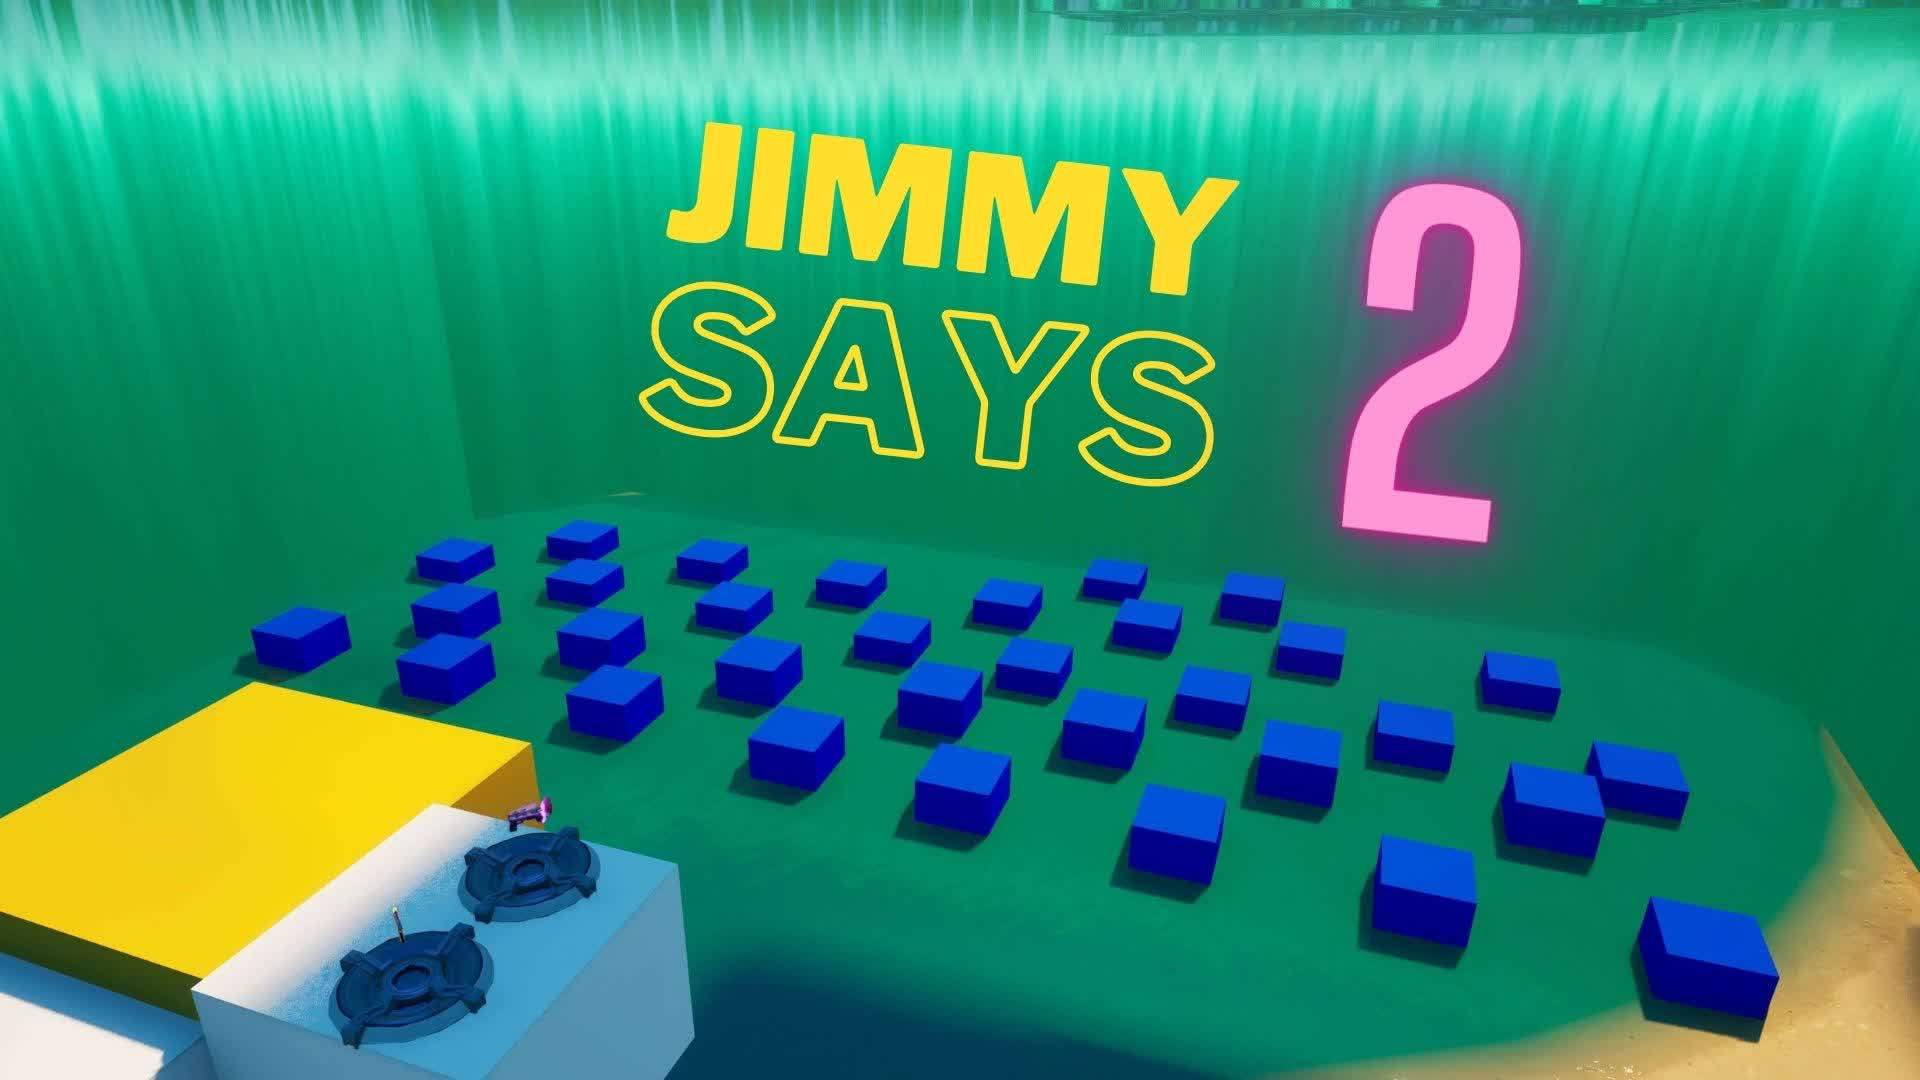 Jimmy Says 2